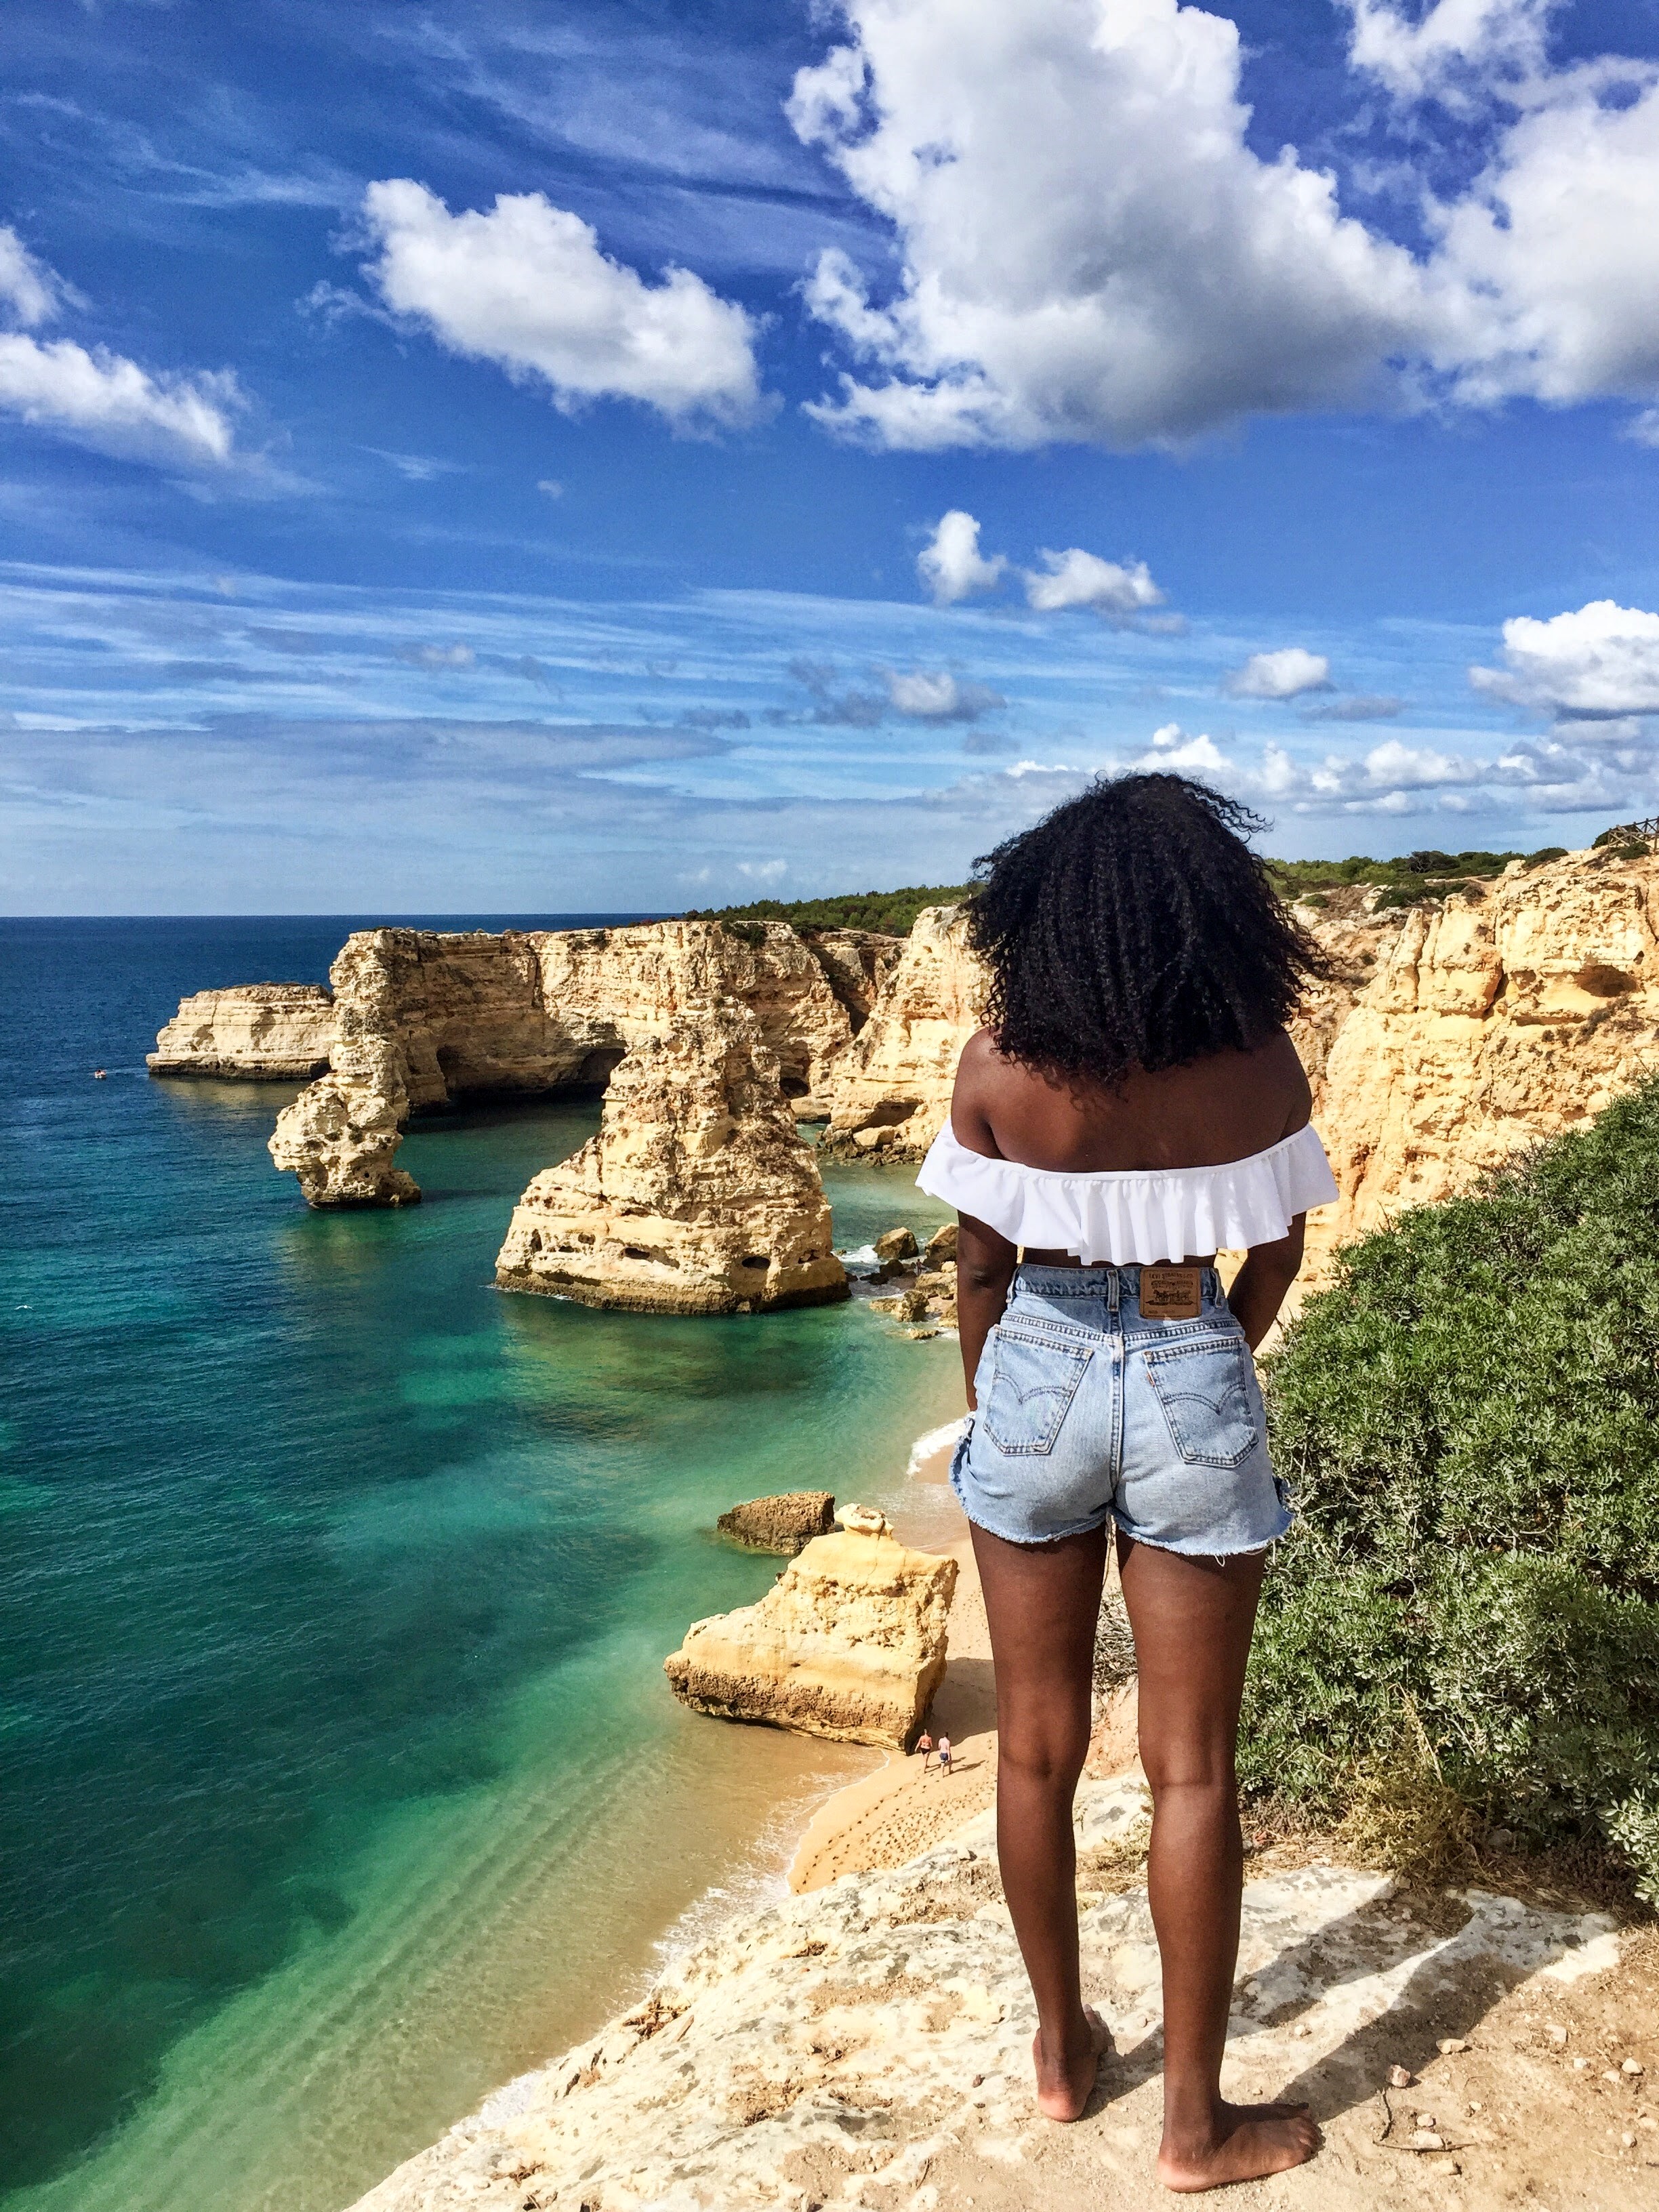   25 Photos That Will Make You Want To Visit The Algarve      Click Here to Read the Post 